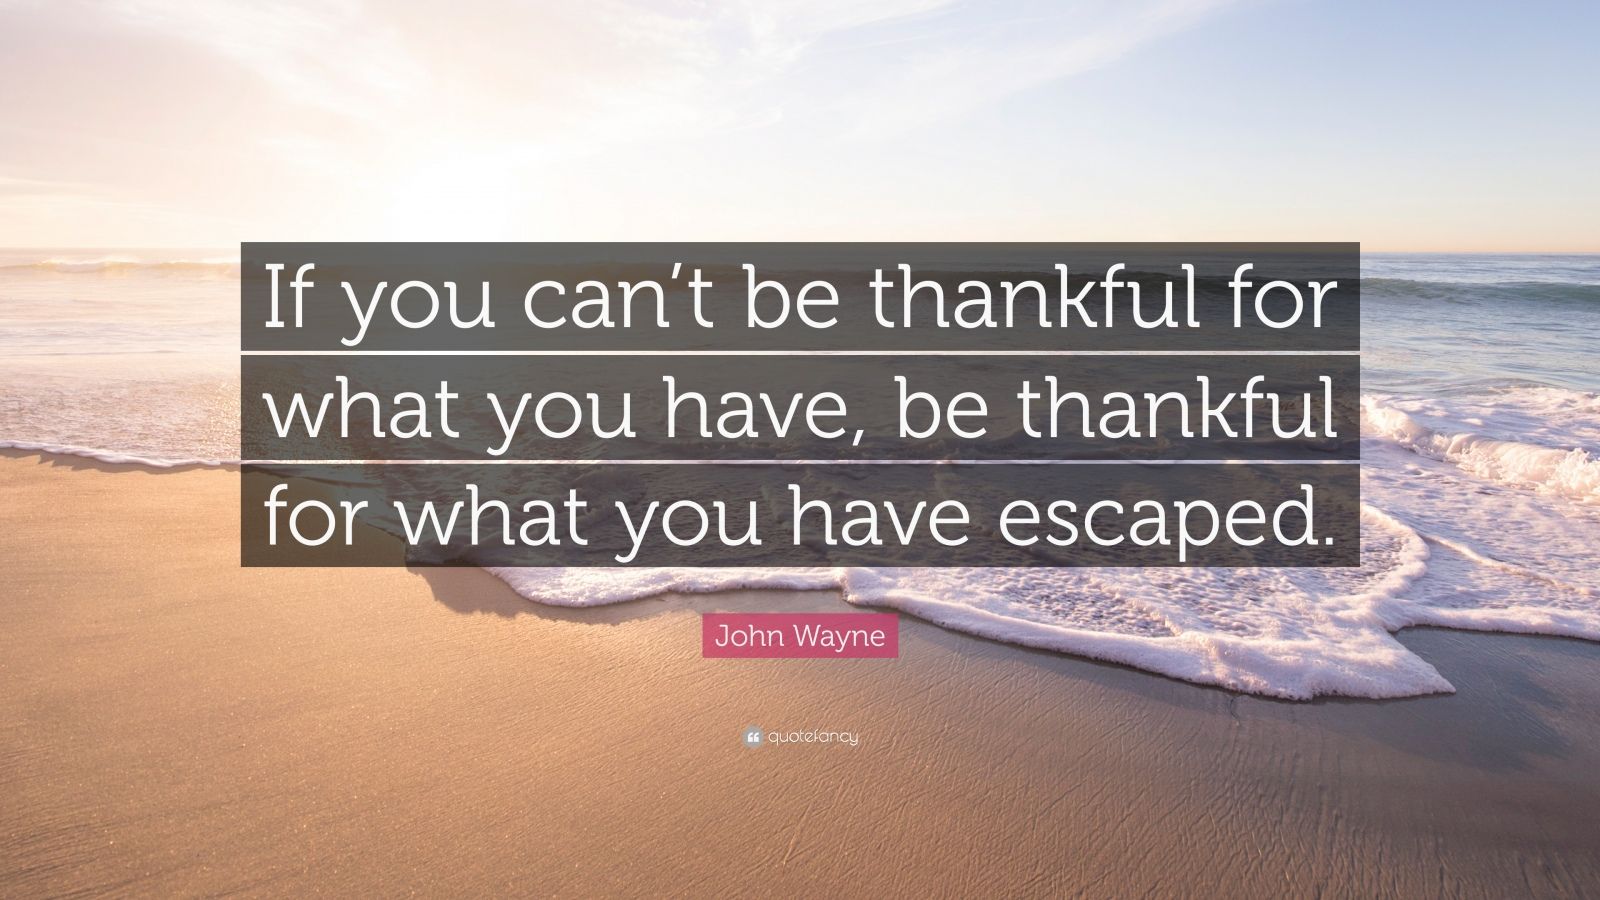 John Wayne Quote: “If you can’t be thankful for what you have, be ...